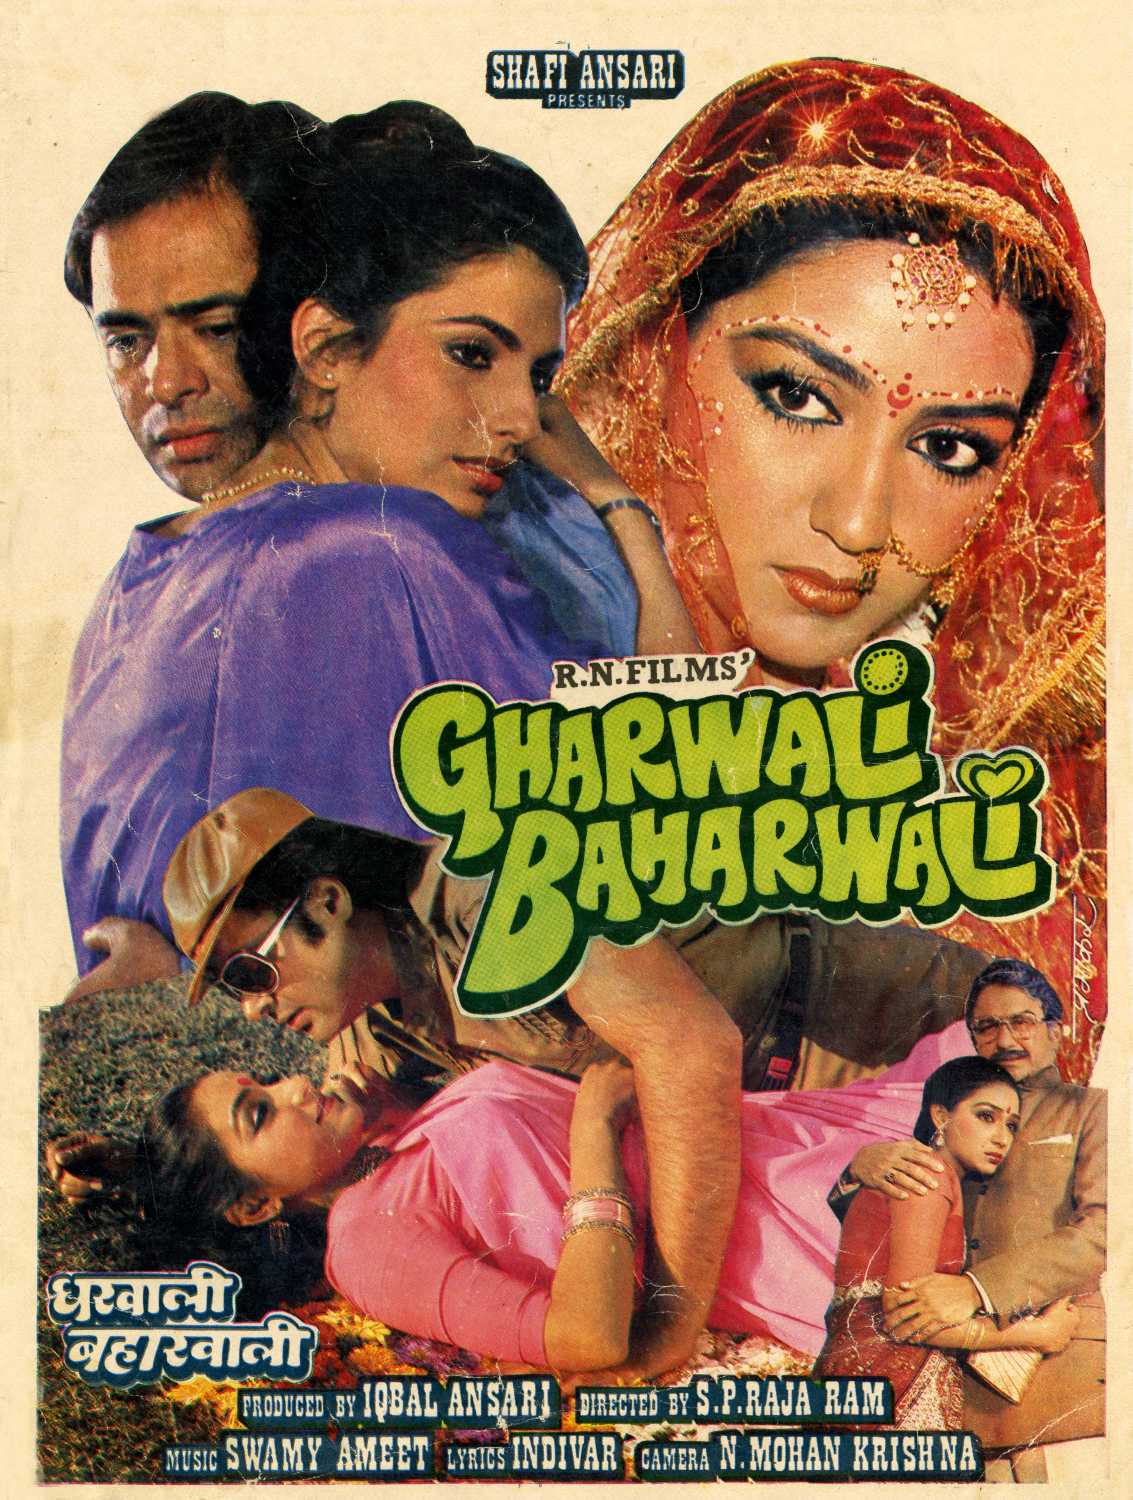 Poster for the movie "Gharwali Baharwali"